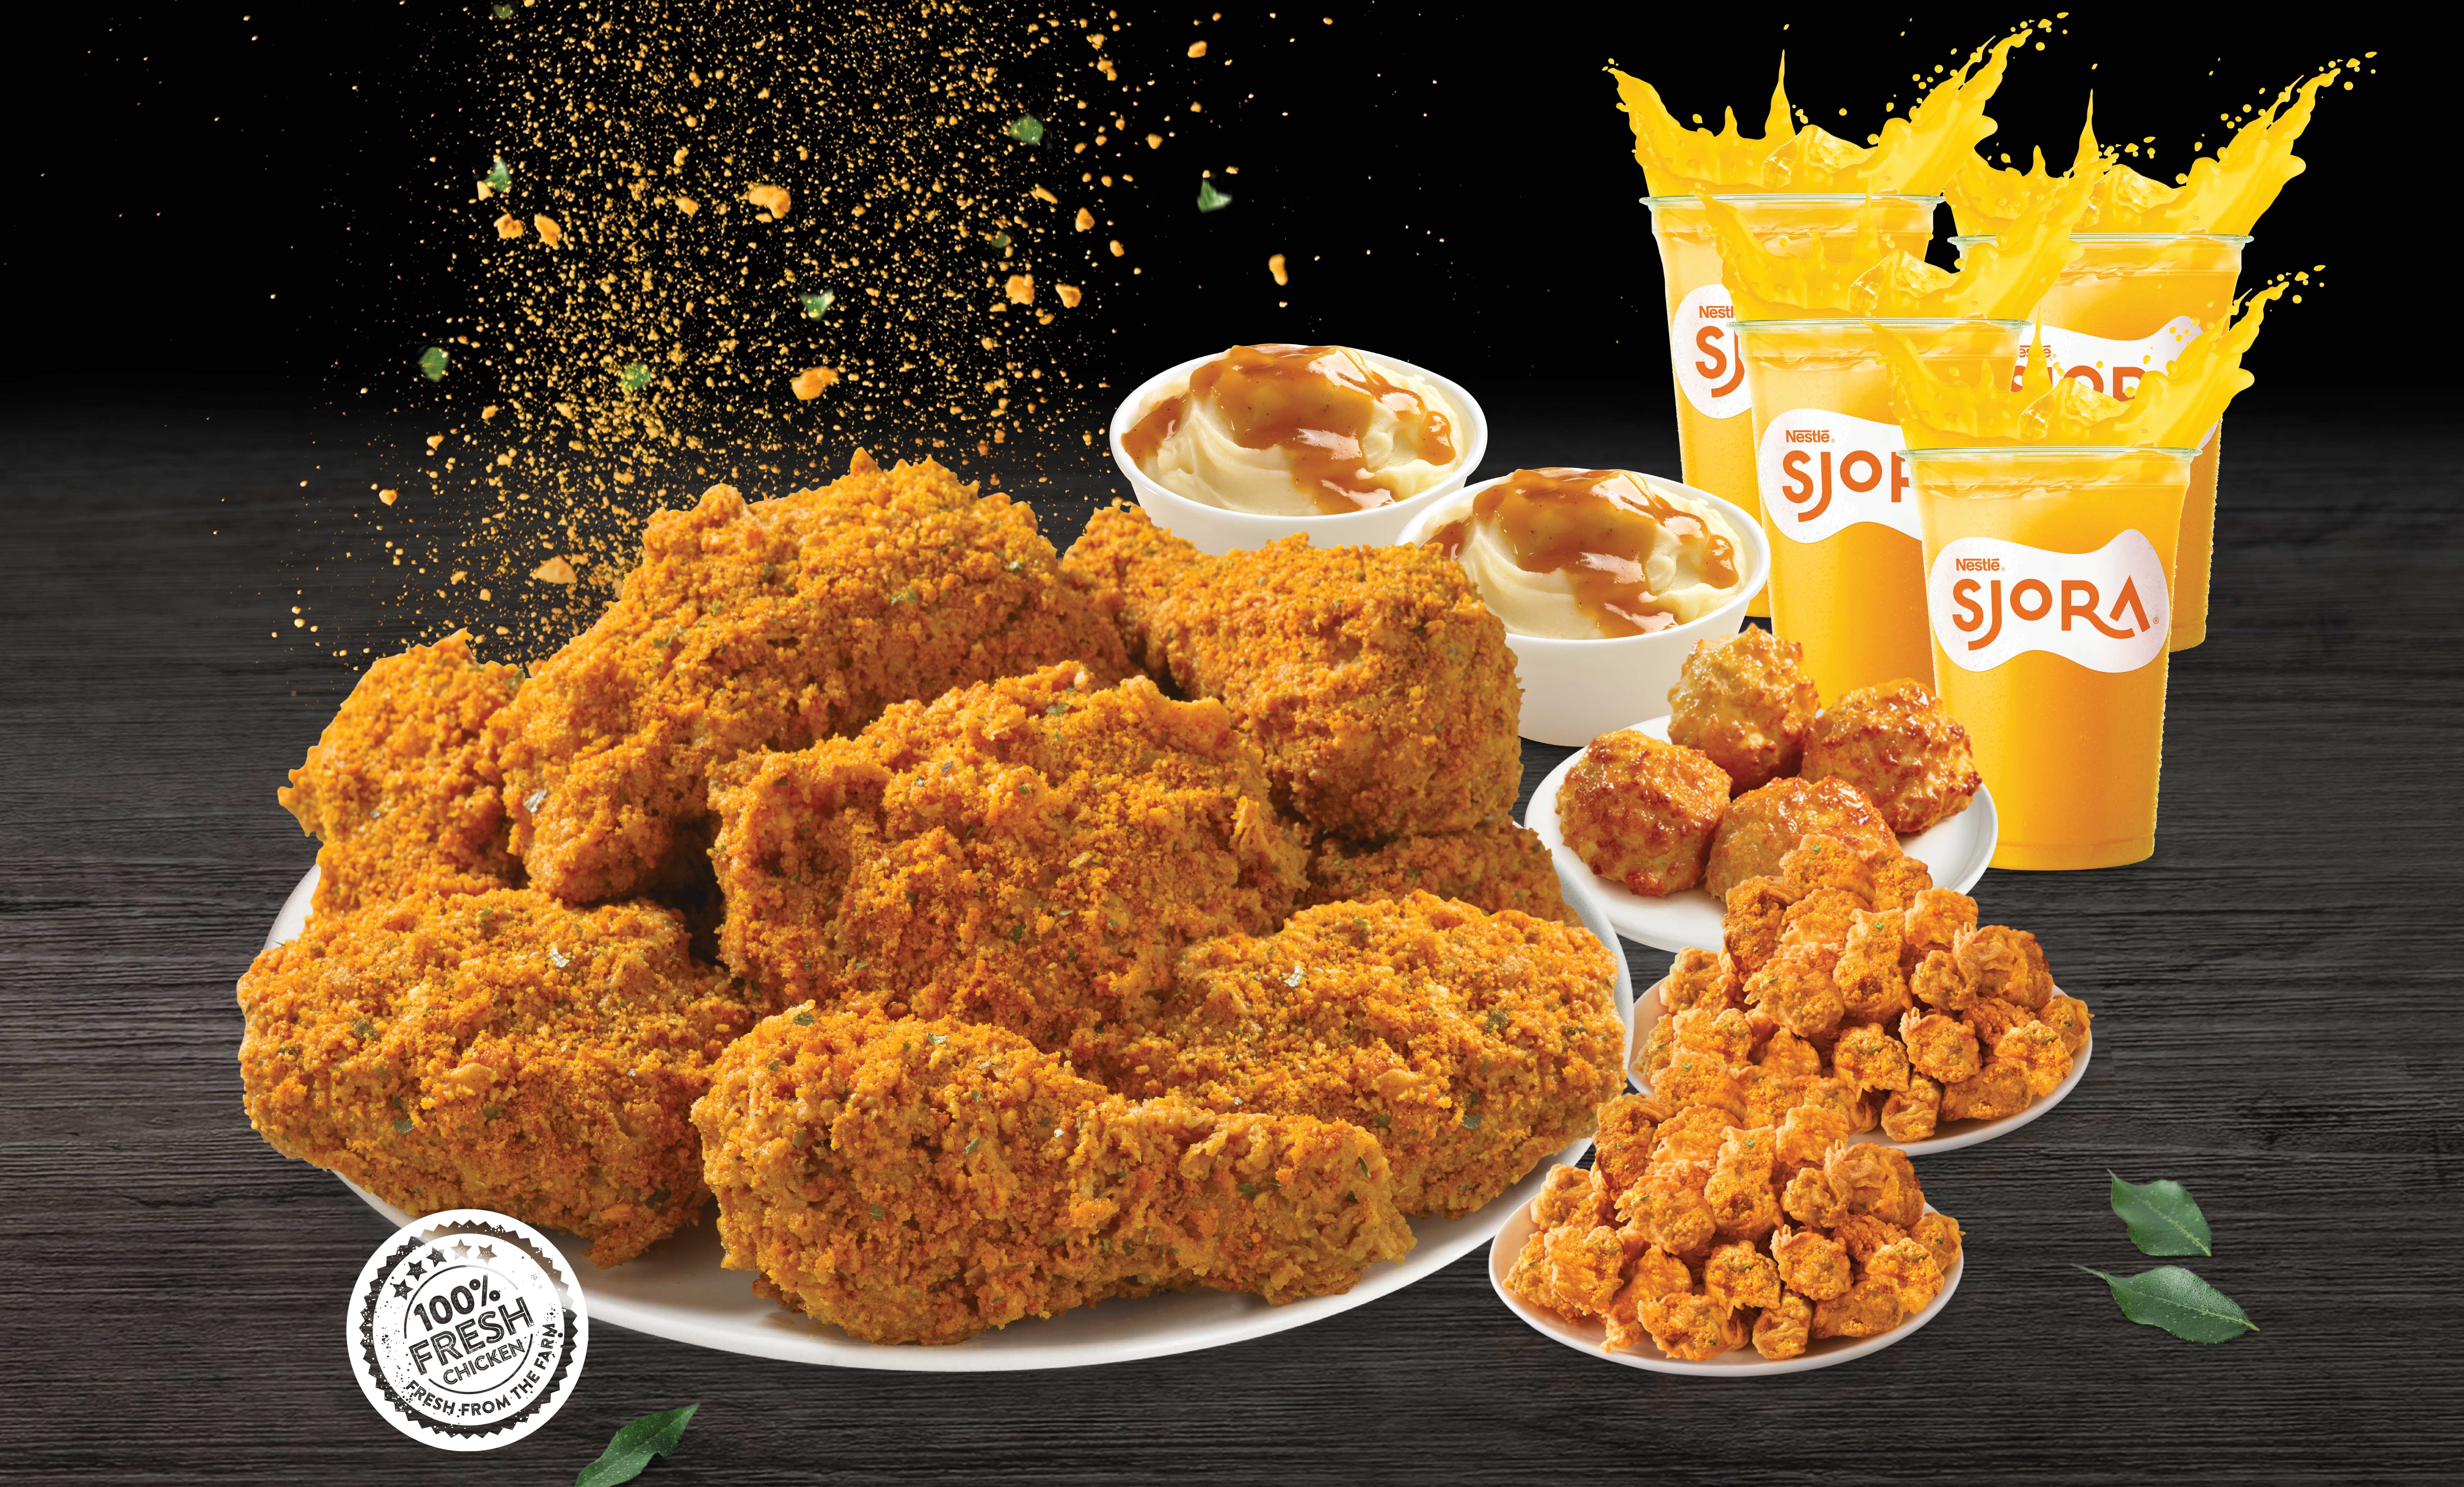 [Promo Inside] Texas Chicken has finally perfected the REAL Salted Egg Fried Chicken recipe - Alvinology